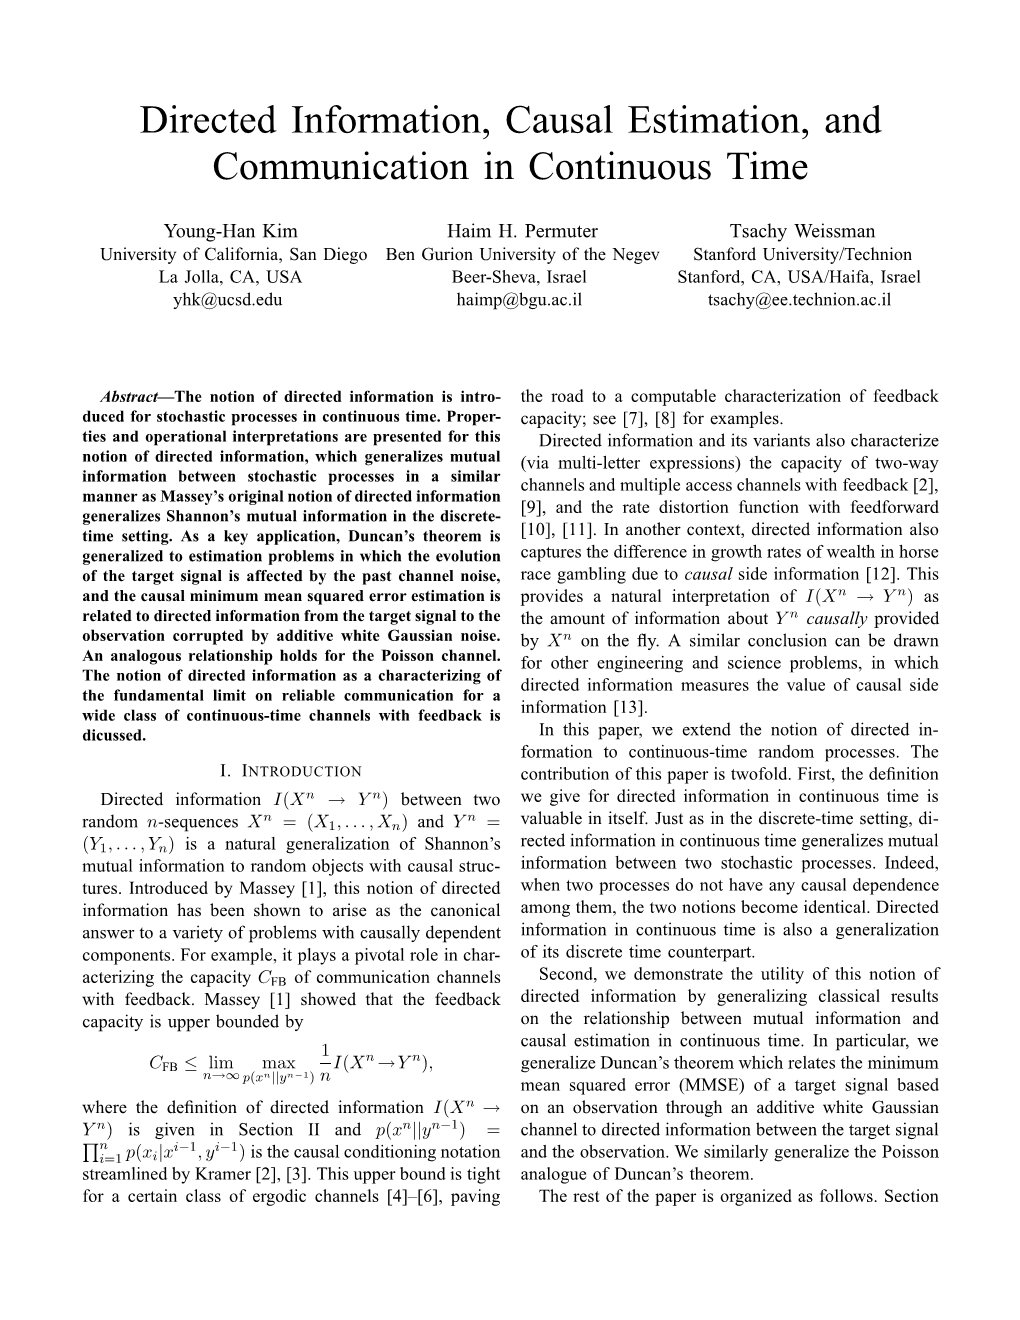 Directed Information, Causal Estimation, and Communication in Continuous Time